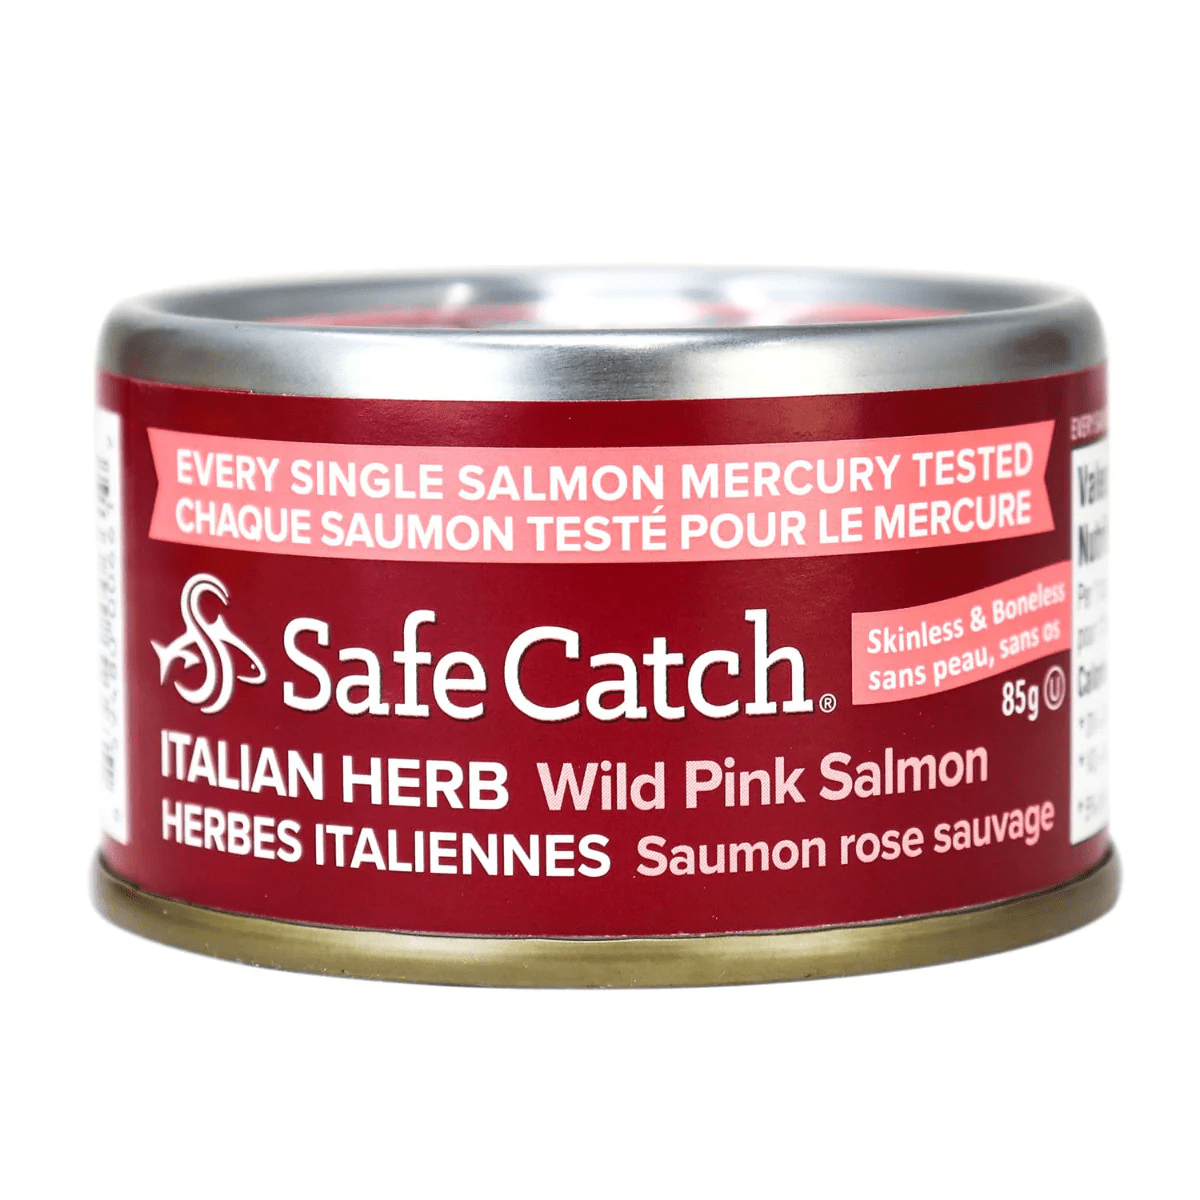 SAFE AND CATCH Épicerie Saumon rose sauvage herbes italiennes 85g